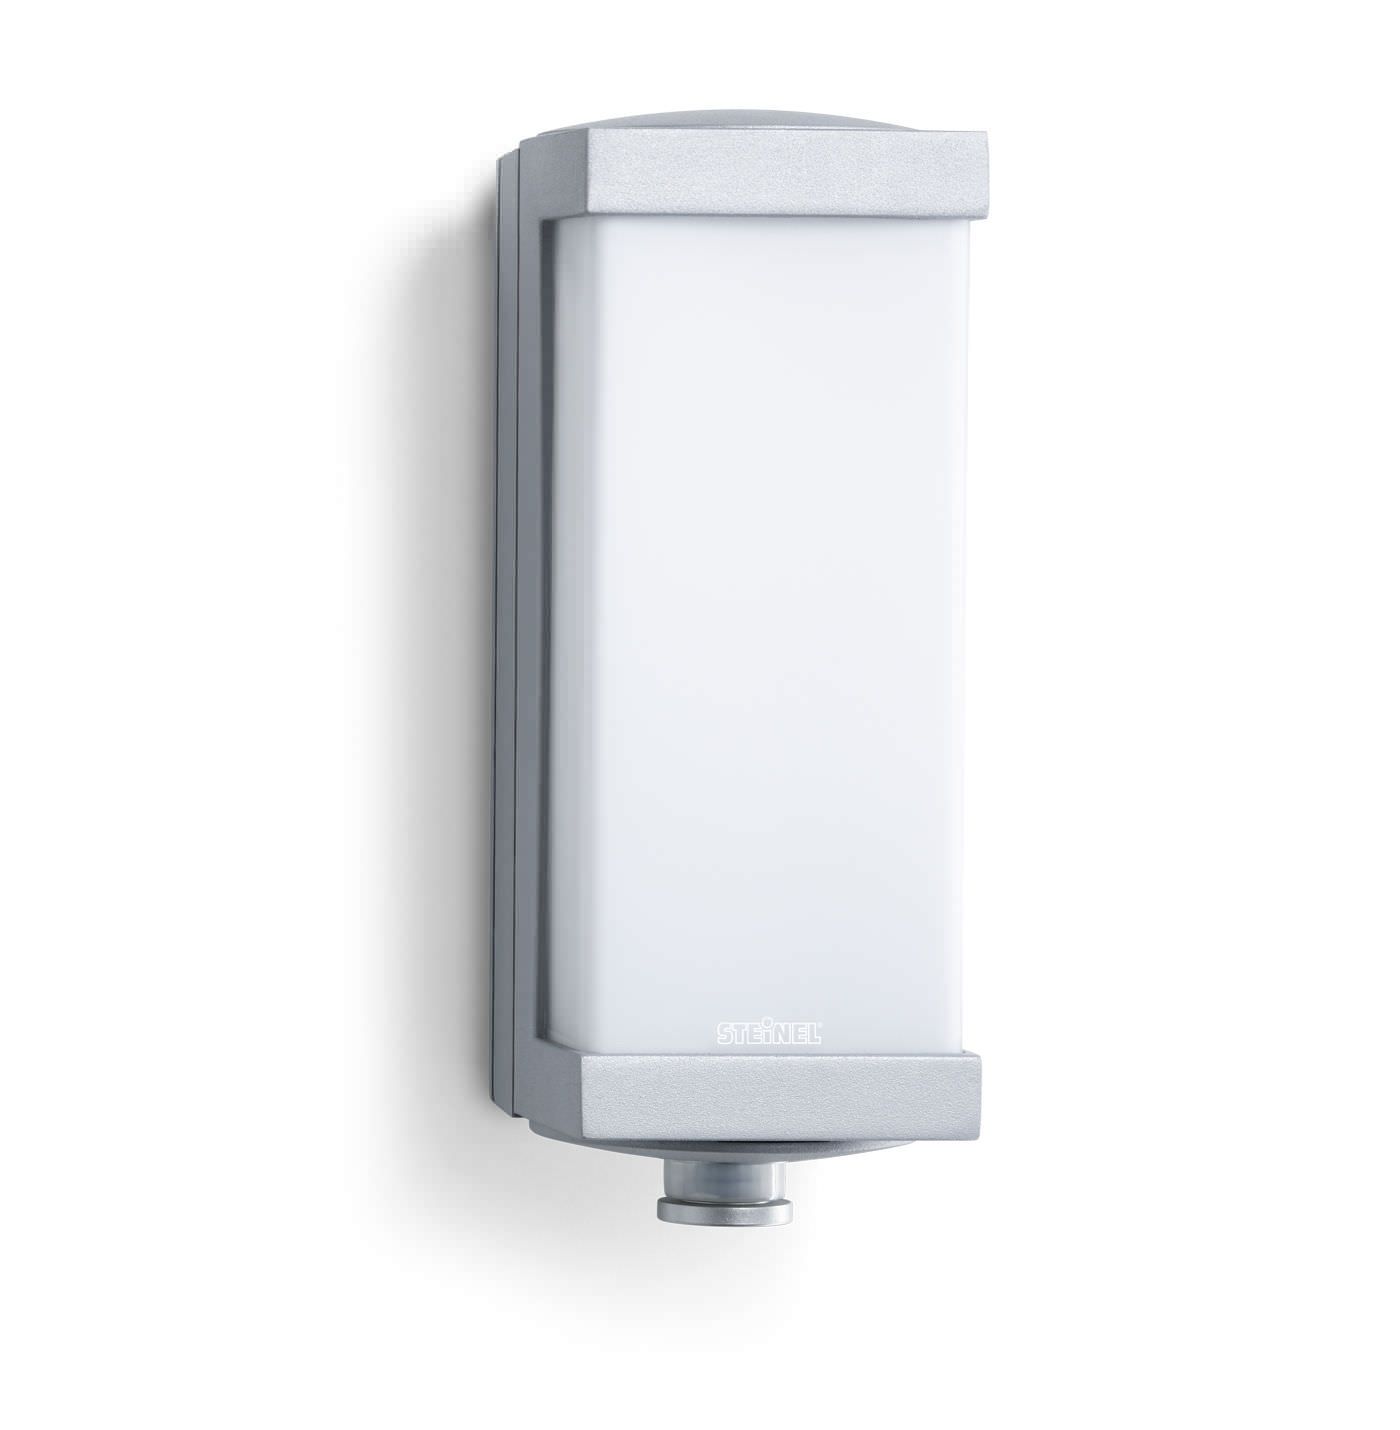 Wall Light: Popular Outdoor Wall Lights With Motion Sensor As Well With Outdoor Wall Lighting With Sensor (View 6 of 15)